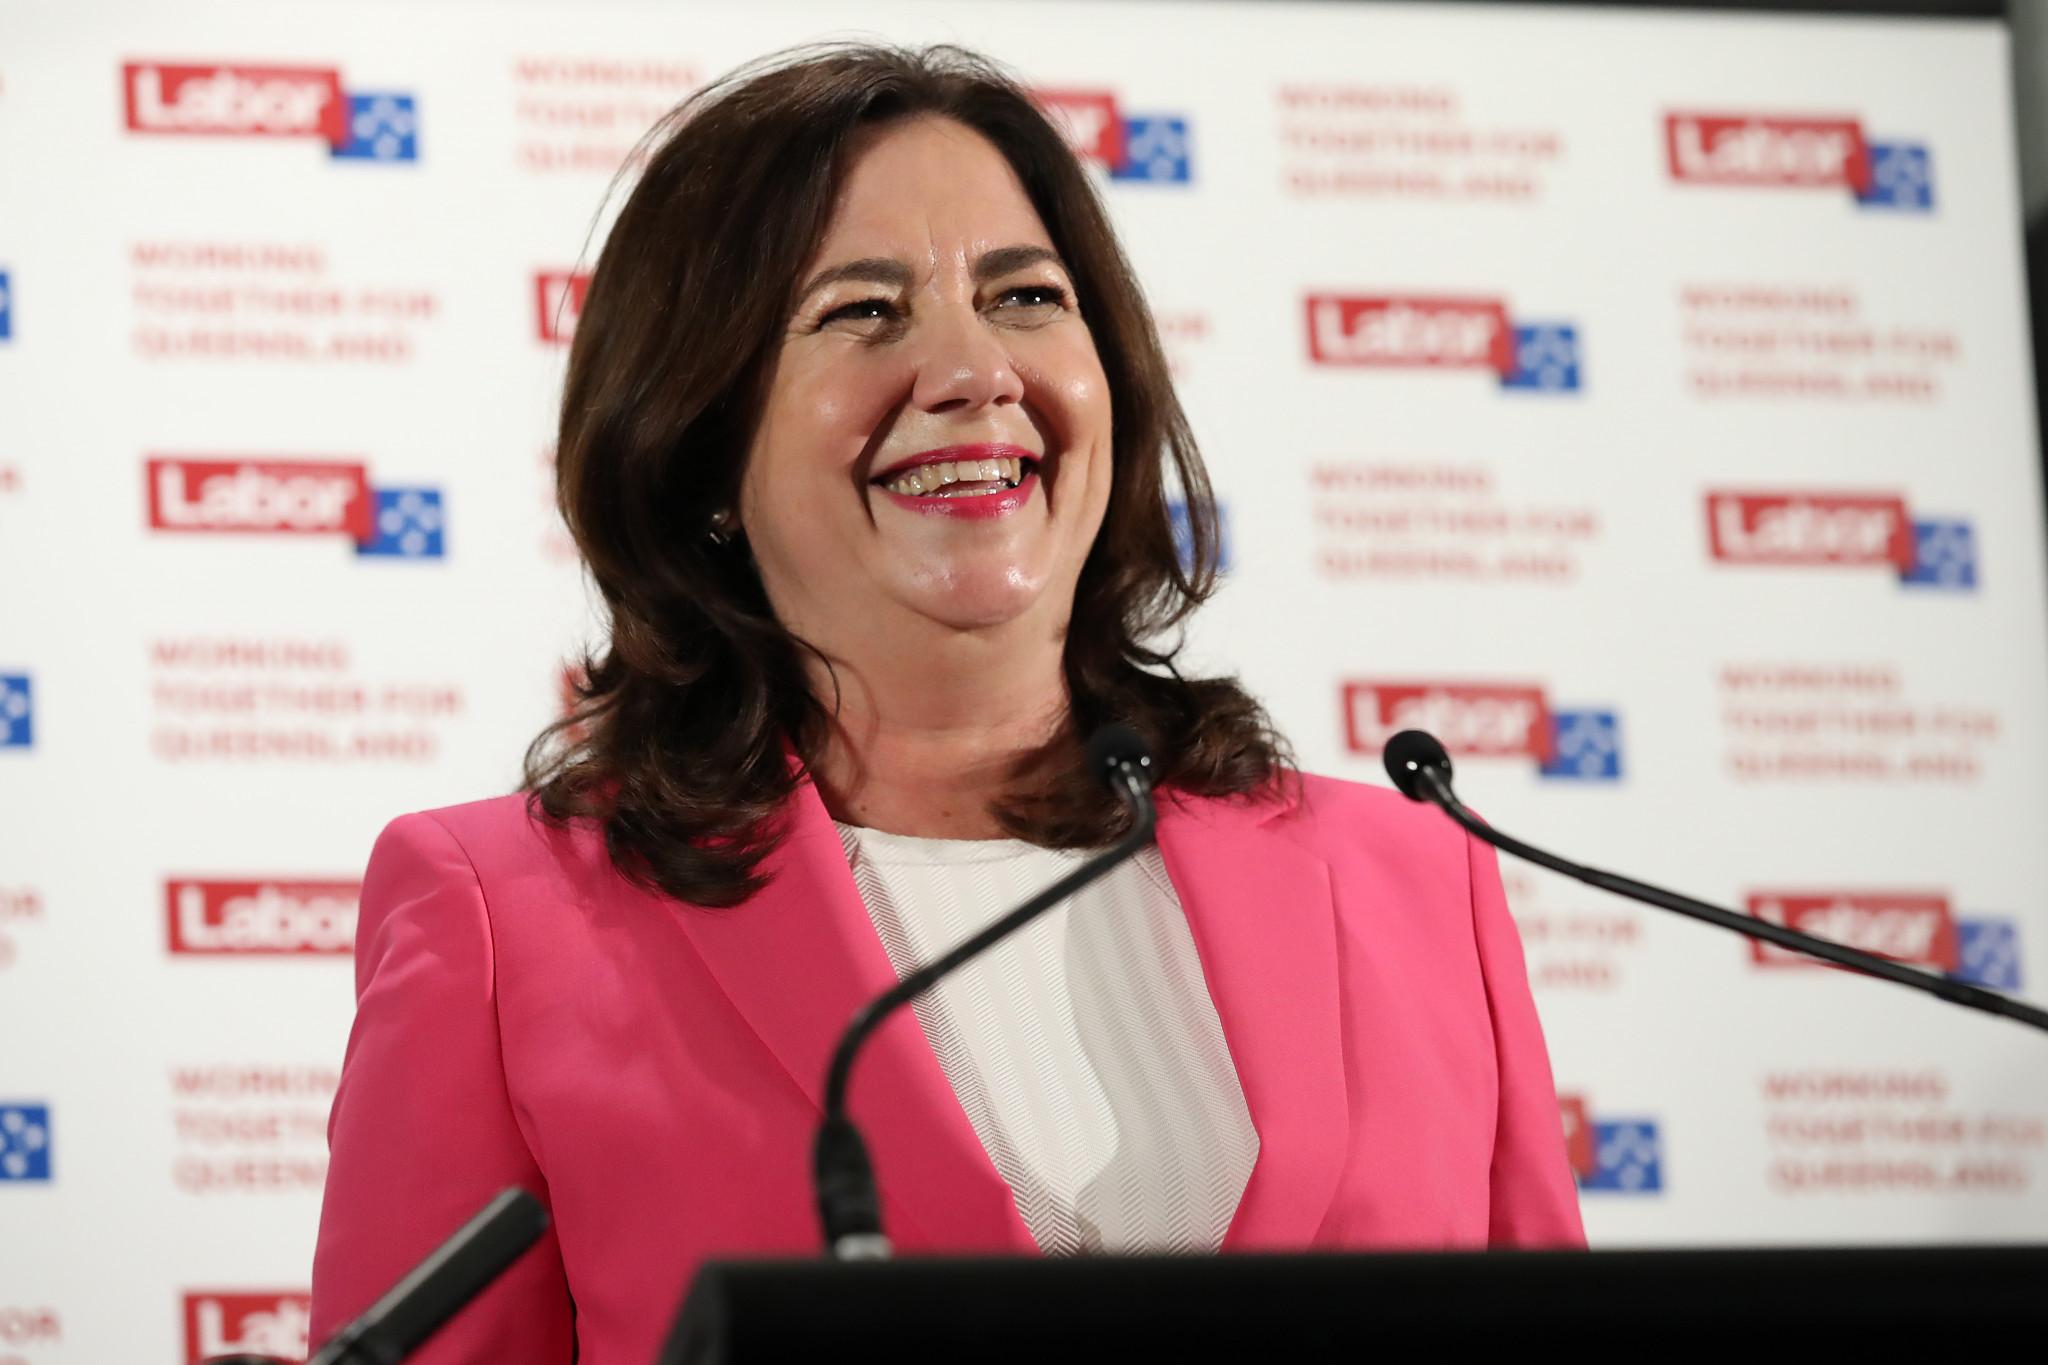 Queensland Premier Palaszczuk secures third term in boost to Olympic bid